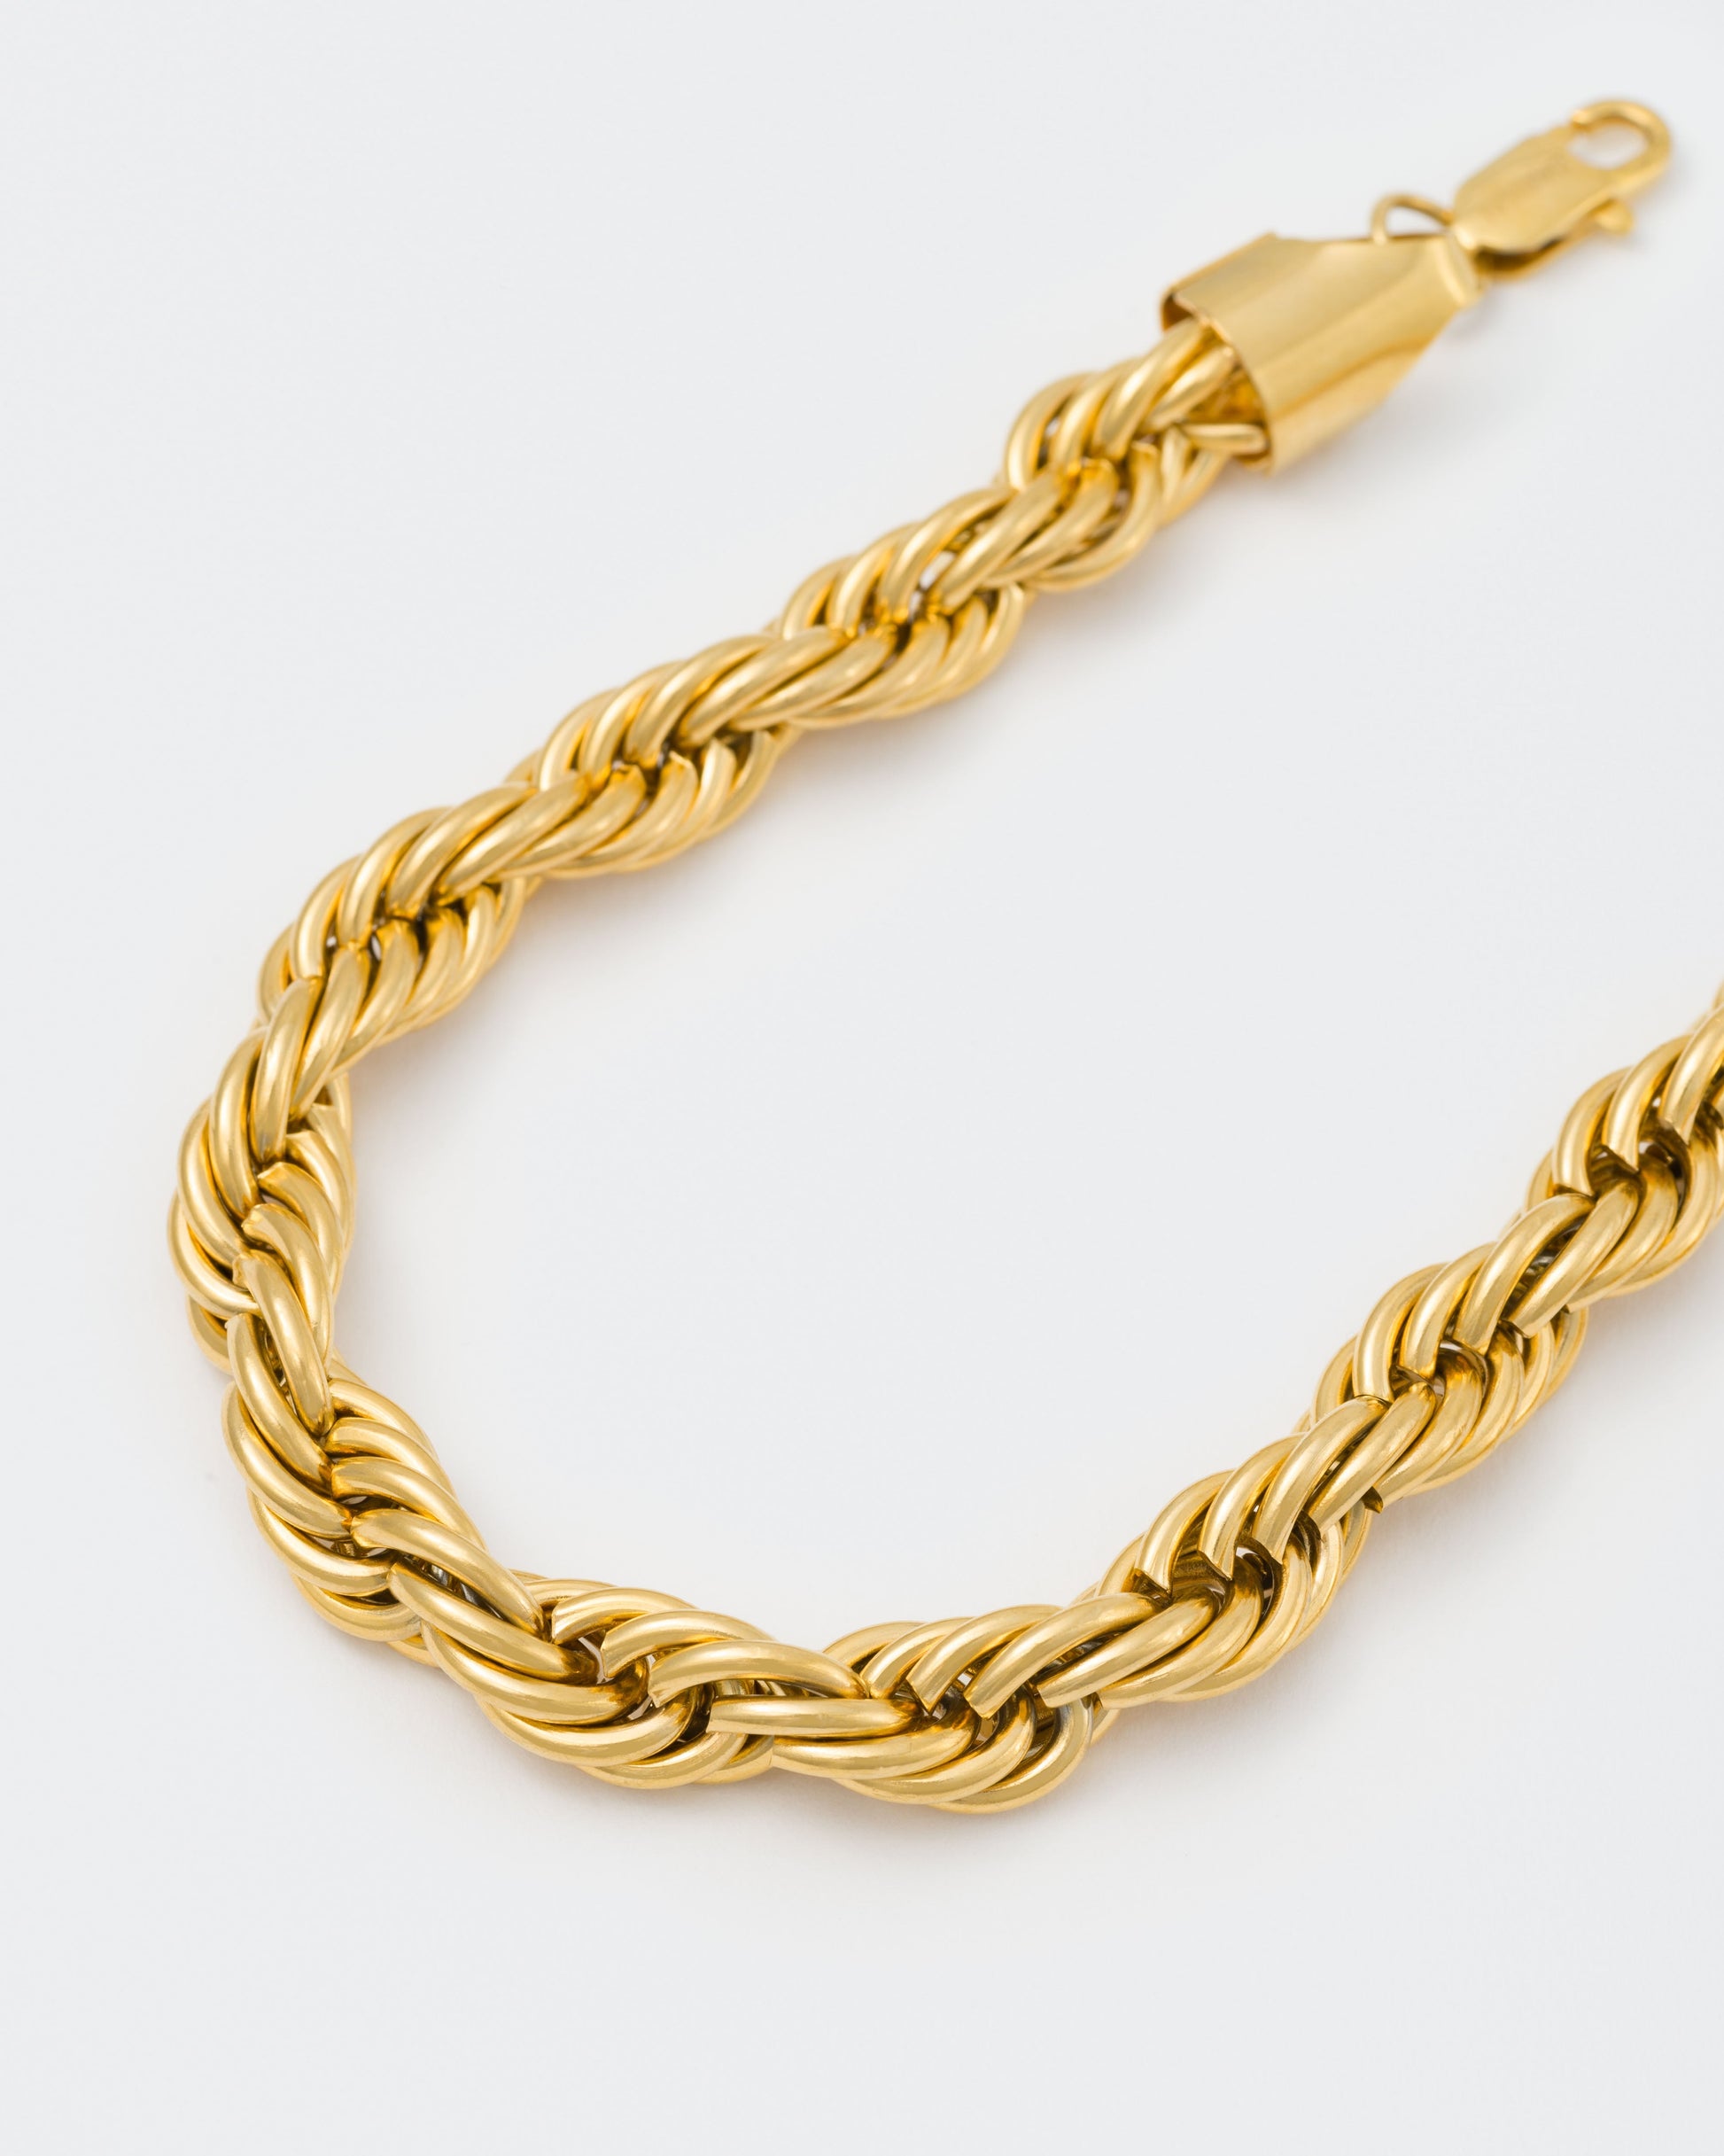 detail of 18k yellow gold coated 90s-inspired rope chain necklace with lasered logo regular lobster clasp.